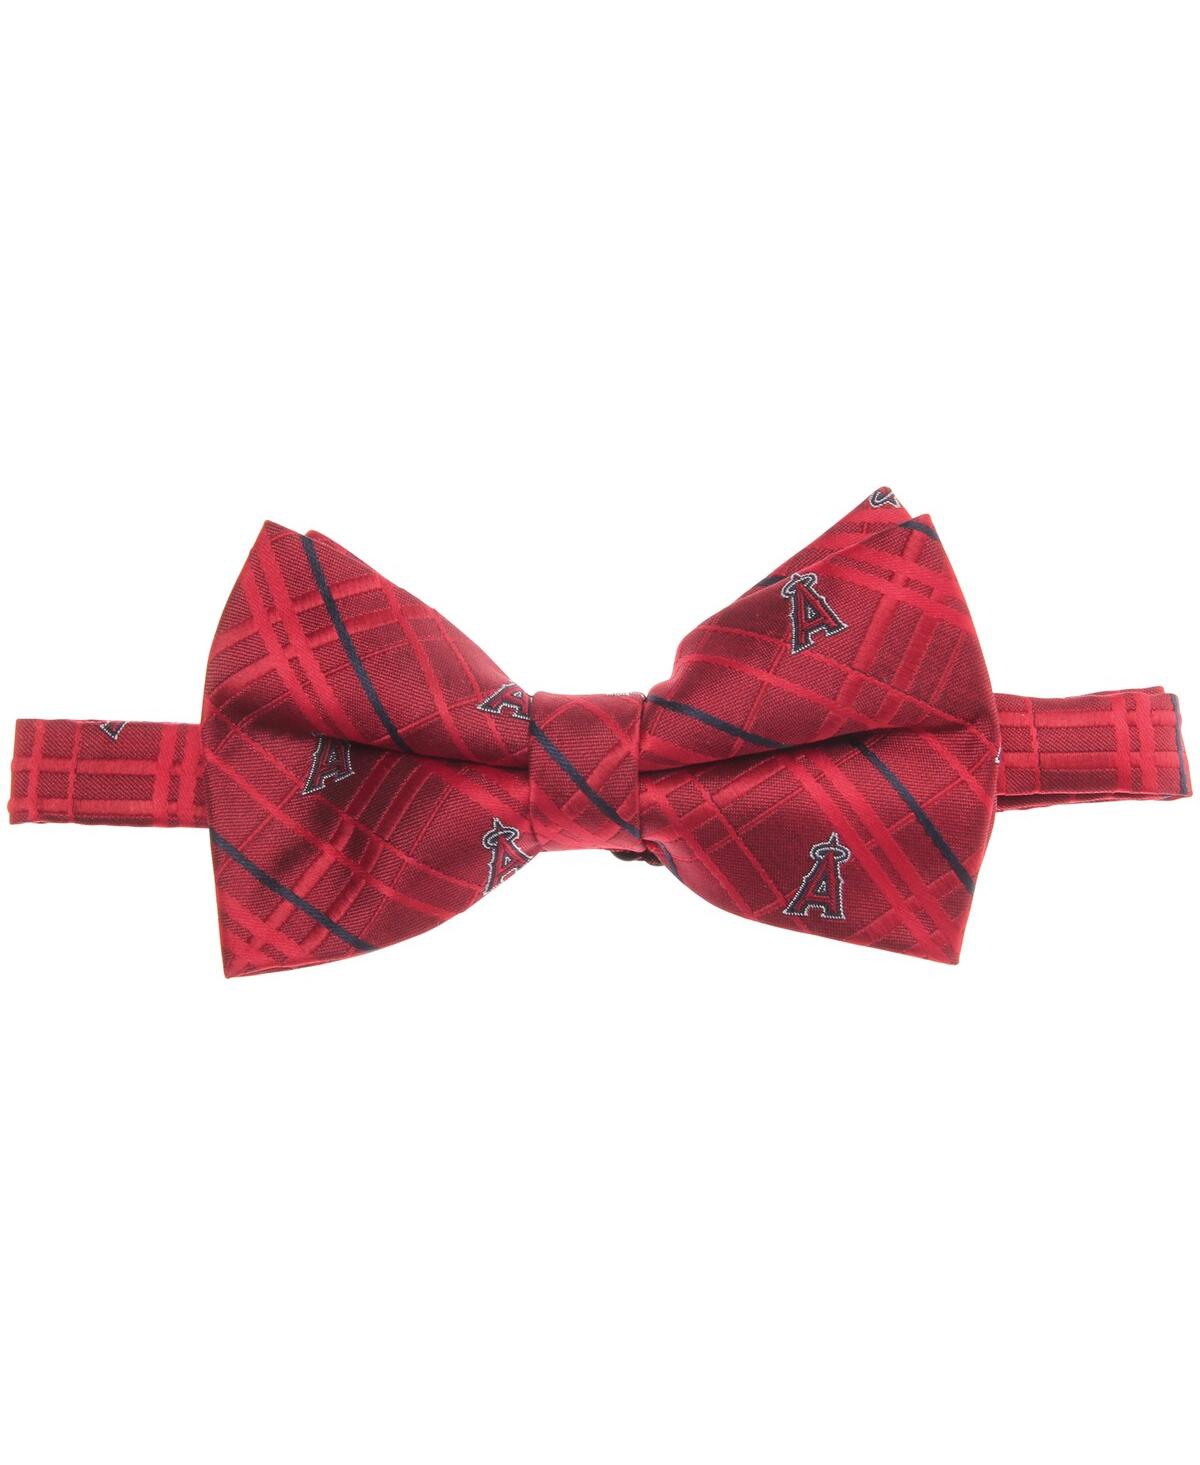 Eagles Wings Men's Red Los Angeles Angels Oxford Bow Tie